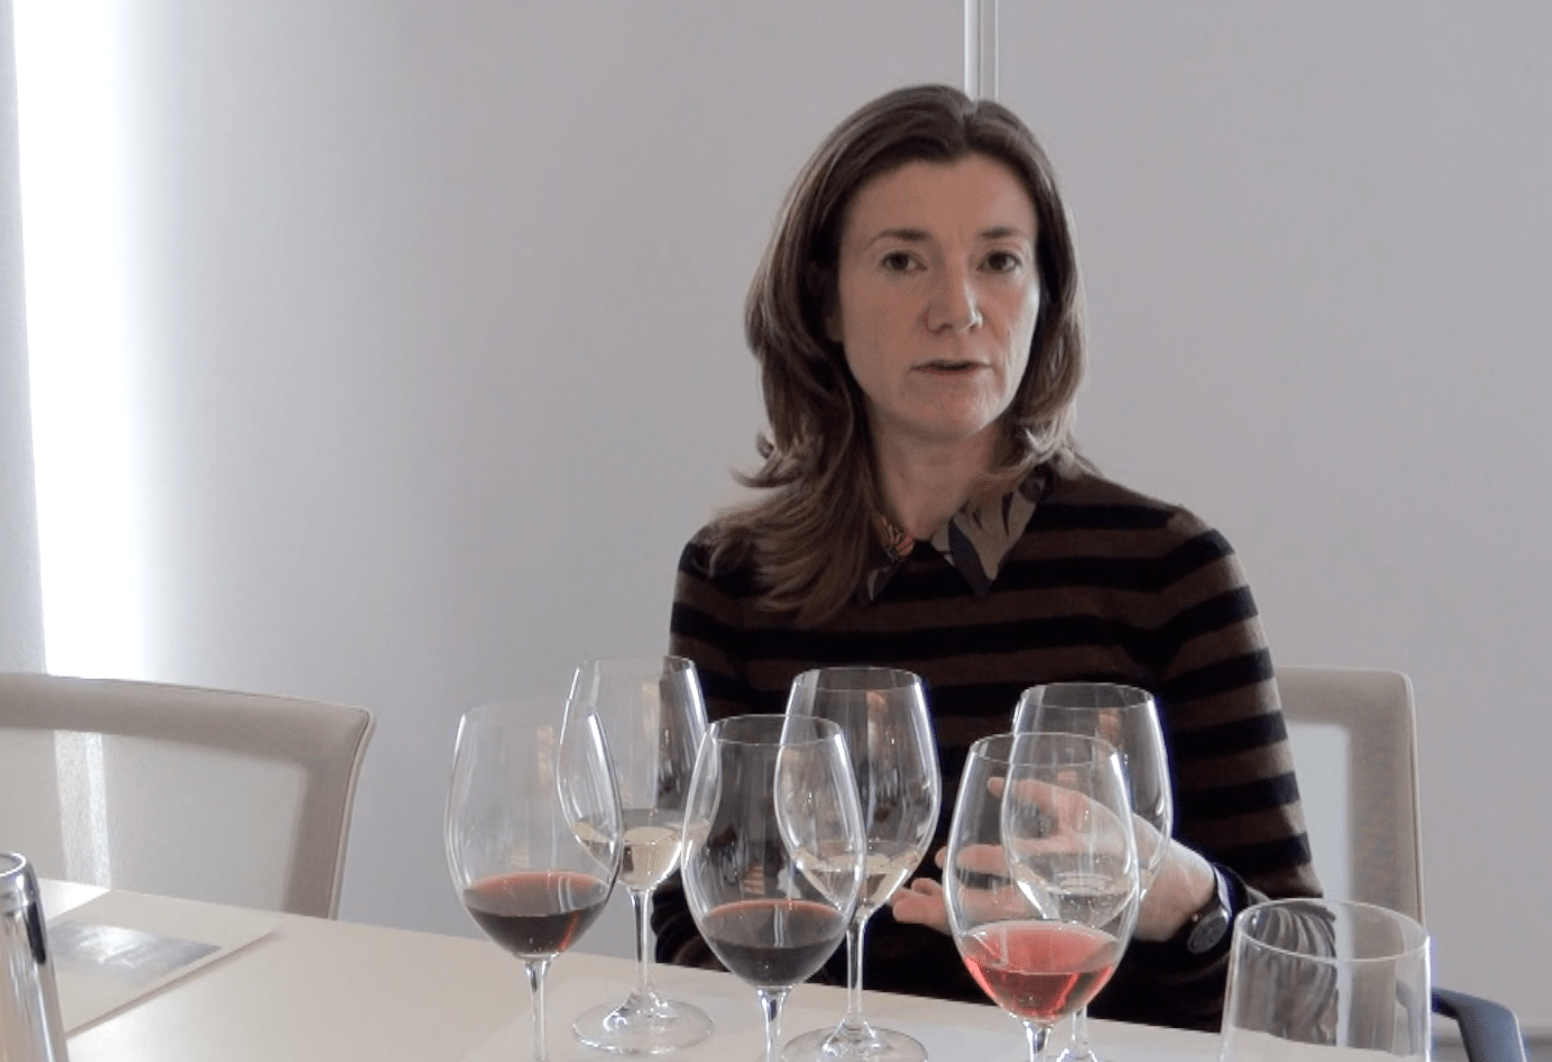 Cristiana Tiberio was in town last month to present her seriously wonderful Abruzzo wines.